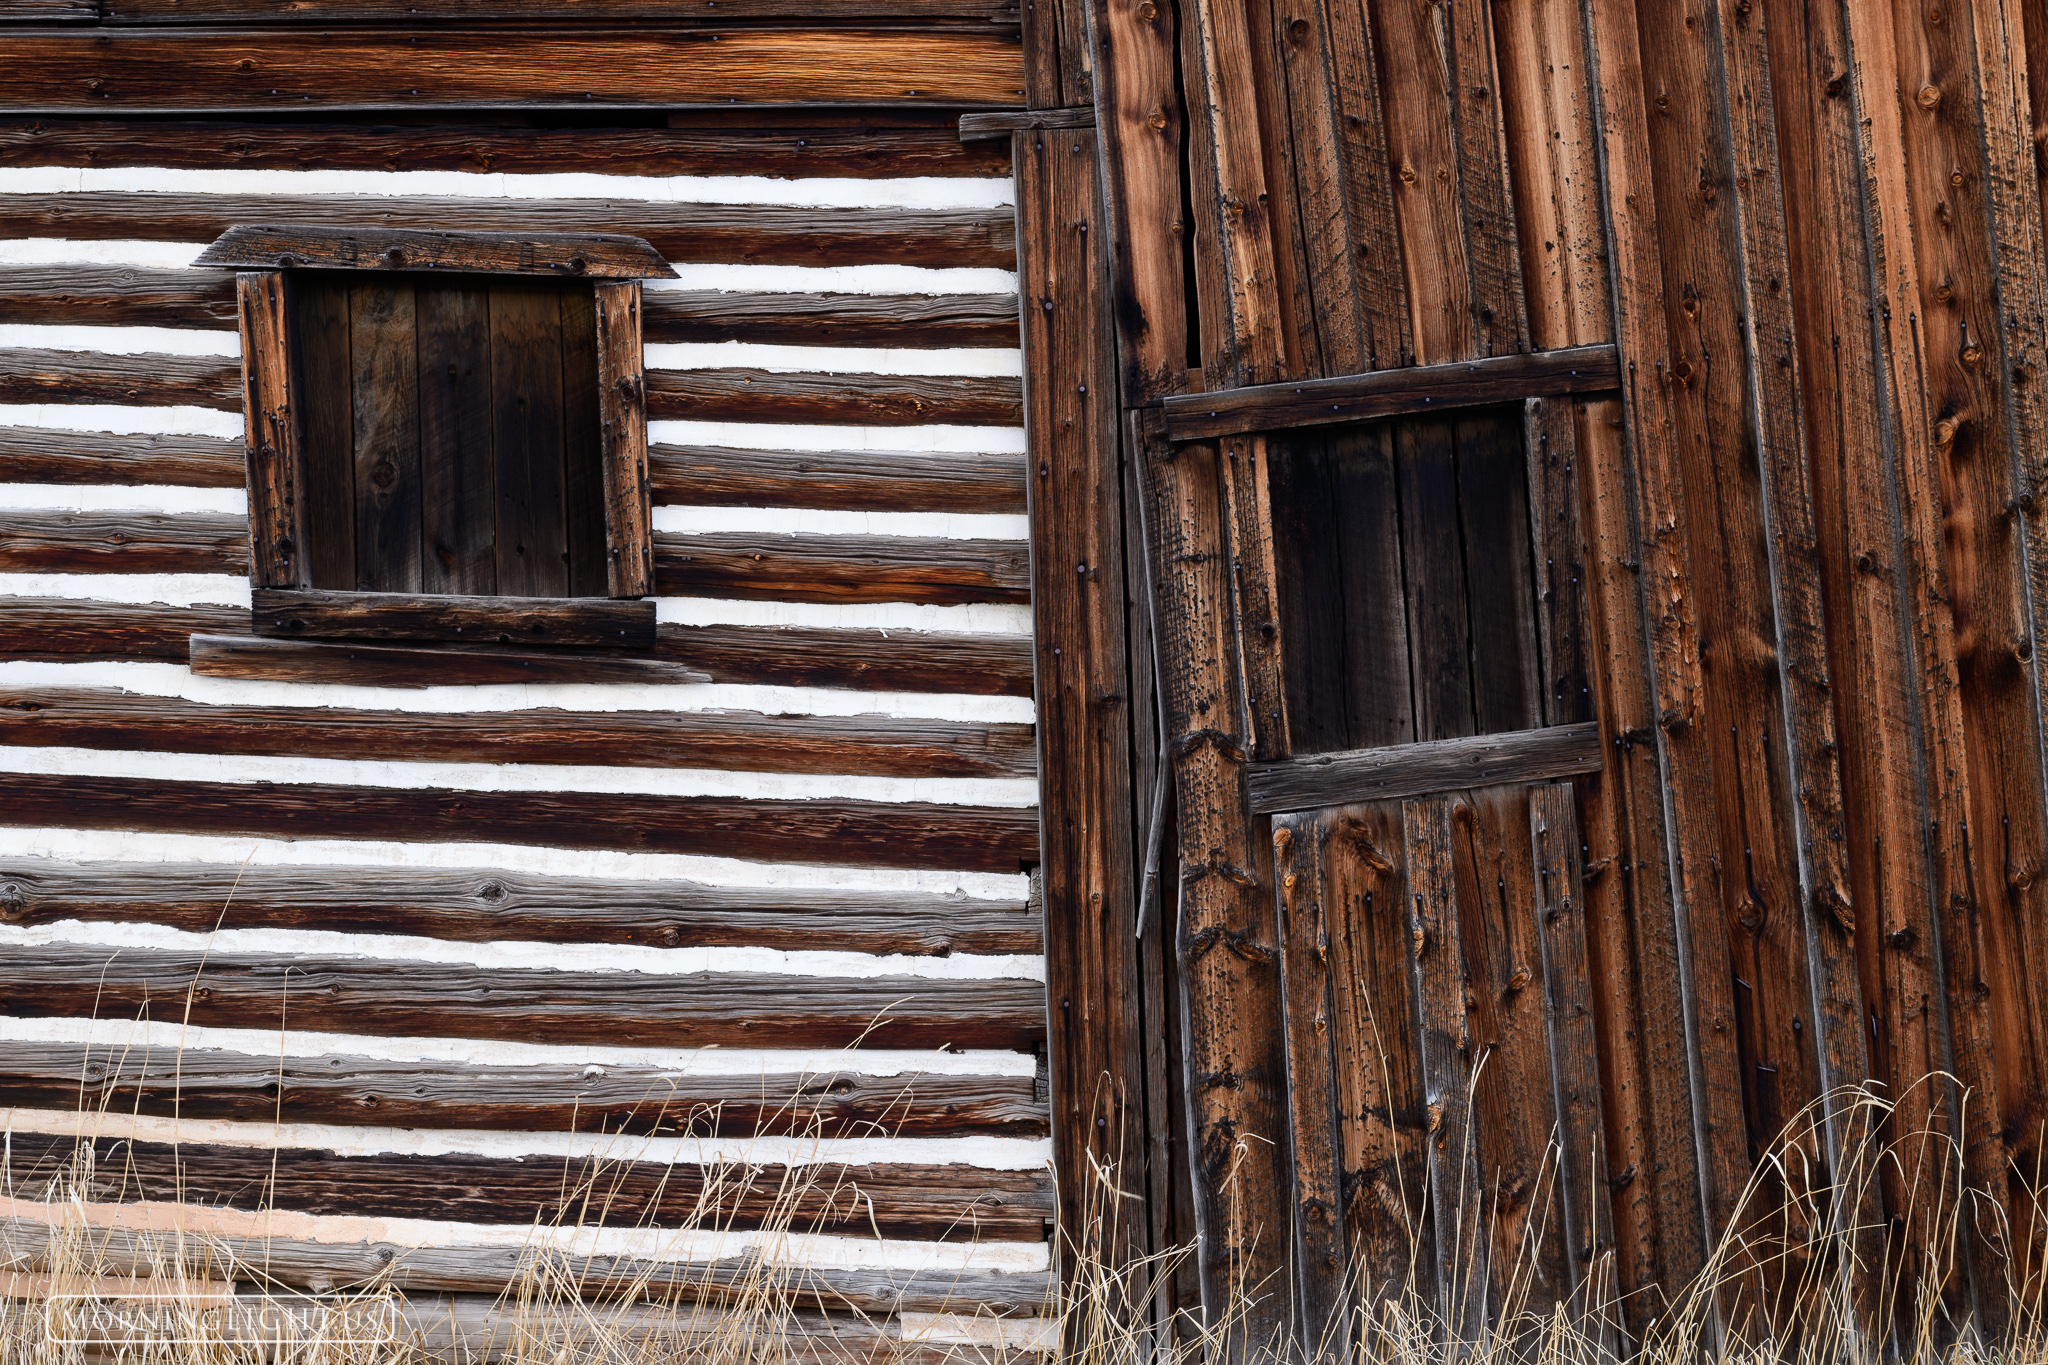 The iconic barn of Steamboat, Colorado, which has graced so many magazine covers and advertisements over the decades, is now...